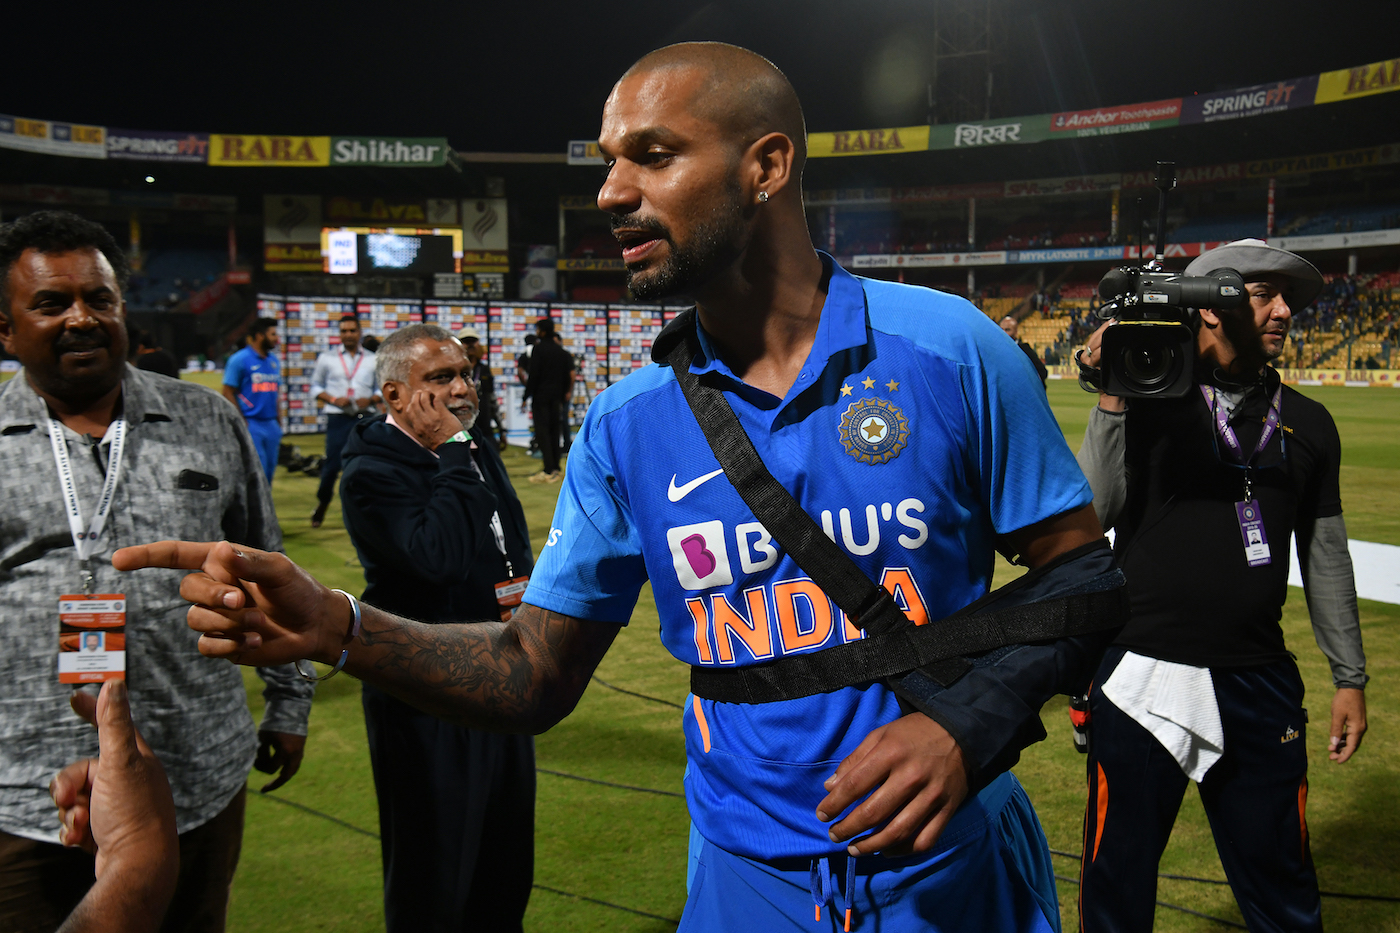 Shikhar Dhawan is ruled out of the ODI series | AFP